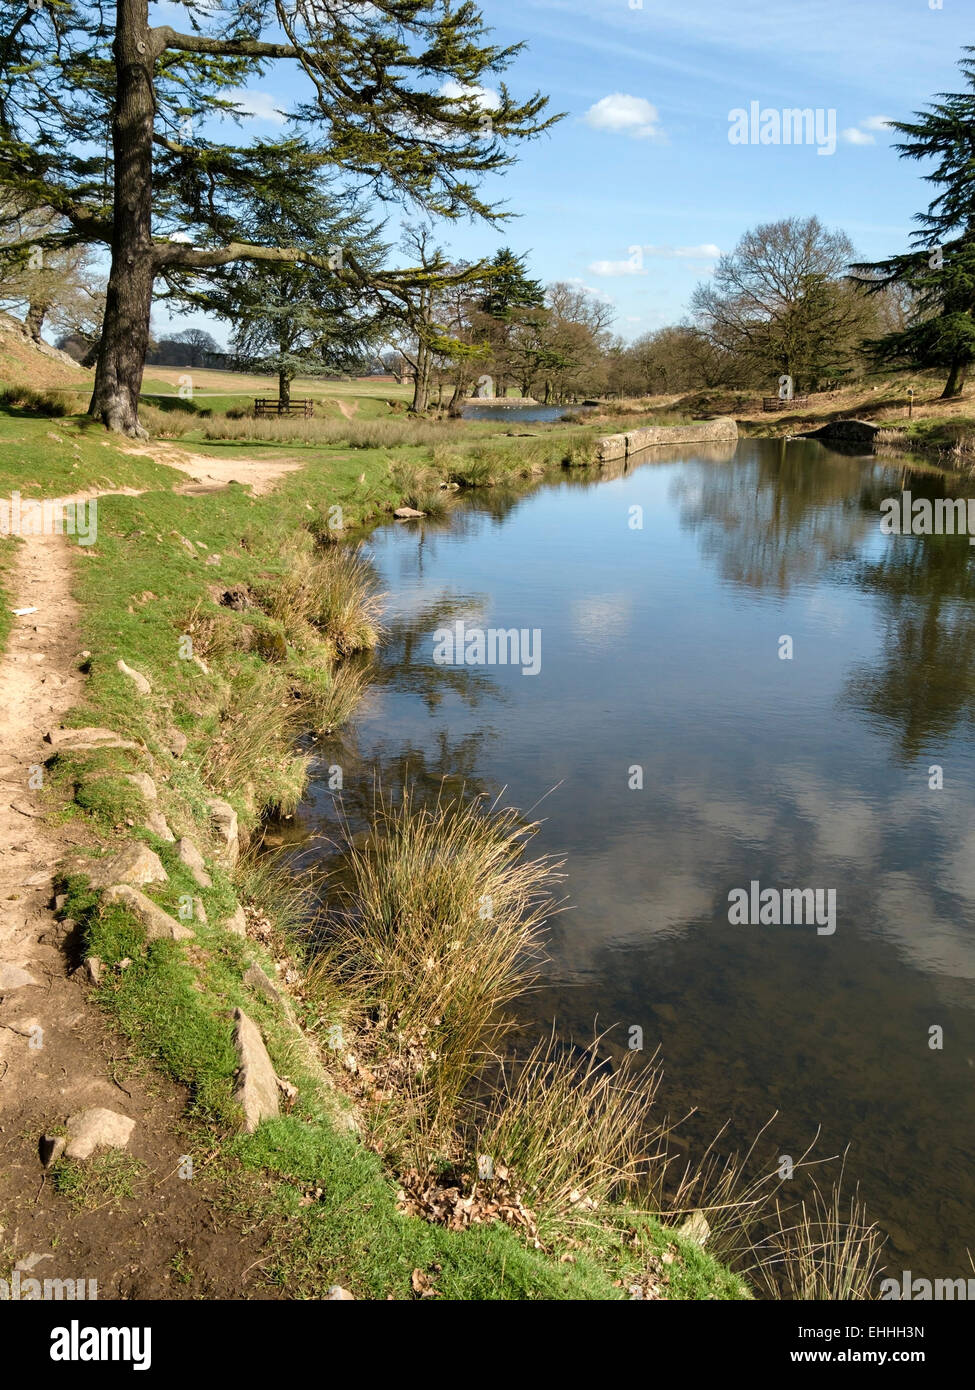 River Lin and trees, Bradgate Park, Charnwood, Leicestershire, England, UK Stock Photo